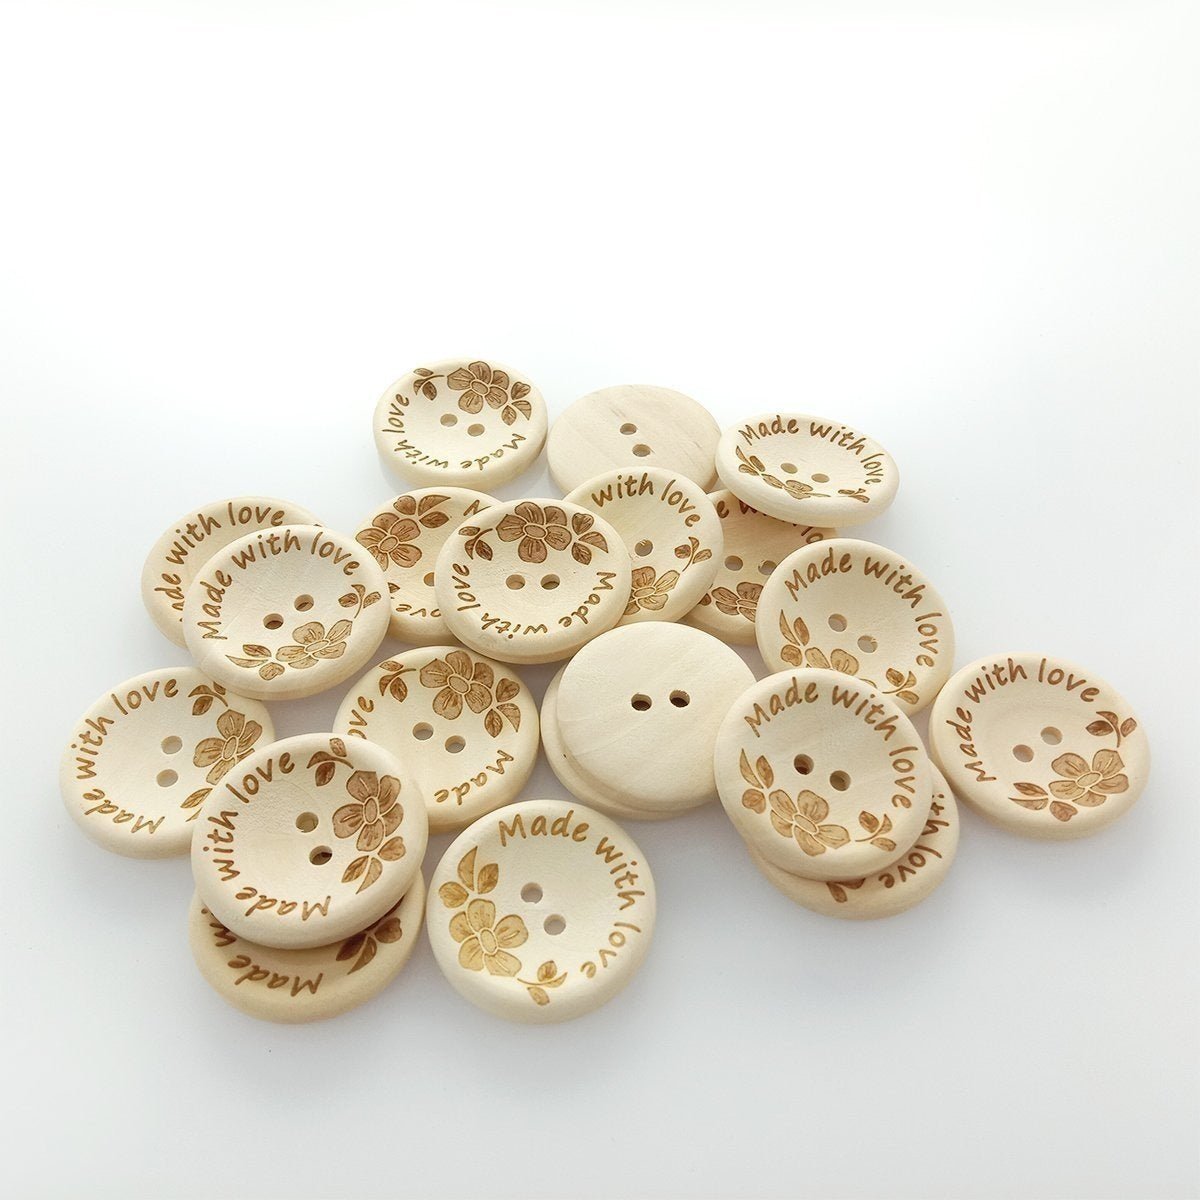 20/30pcs 25mm/30mm Made With Love Handmade Clothes Flower Wooden Sewing Buttons - 30mm 20pcs - - Asia Sell